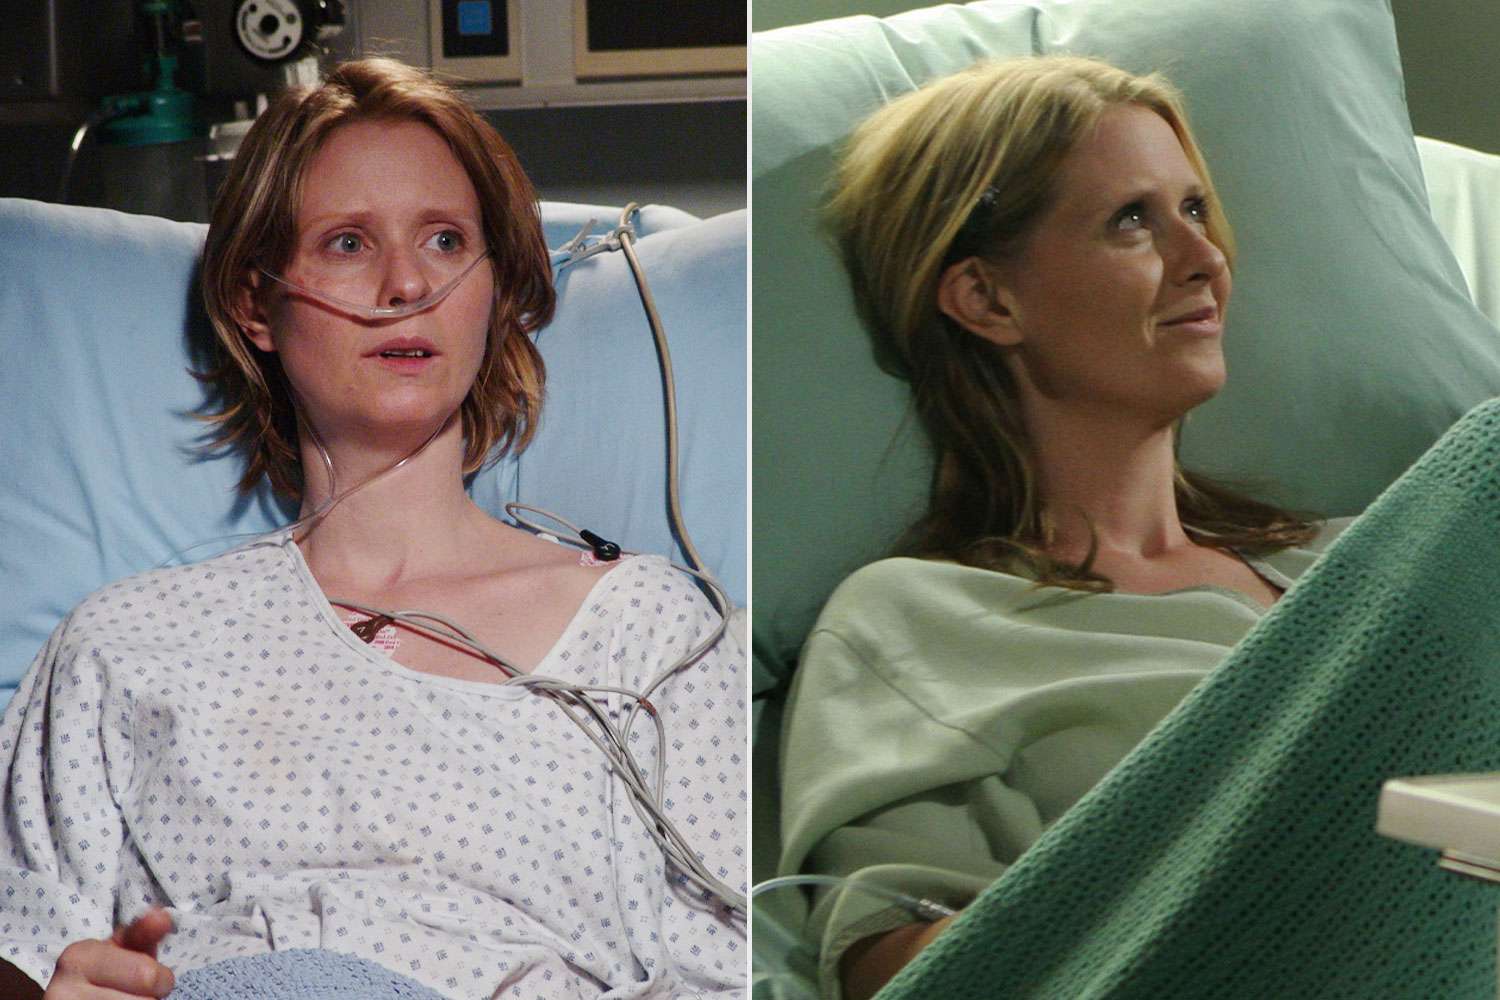 ER -- "Alone In The Crowd" Episode 15 -- Air Date 02/17/2005 -- Pictured: Cynthia Nixon as Ellie Shore -- Photo by: Danny Feld/NBCU Photo BankHOUSE -- "Deception" Episode 9 -- Pictured: (l-r) Cynthia Nixon as Anica Javanovich and Hugh Laurie as Dr. Gregory House -- (Photo by: Dean Hendler/Universal Television/NBCU Photo Bank/NBCUniversal via Getty Images)